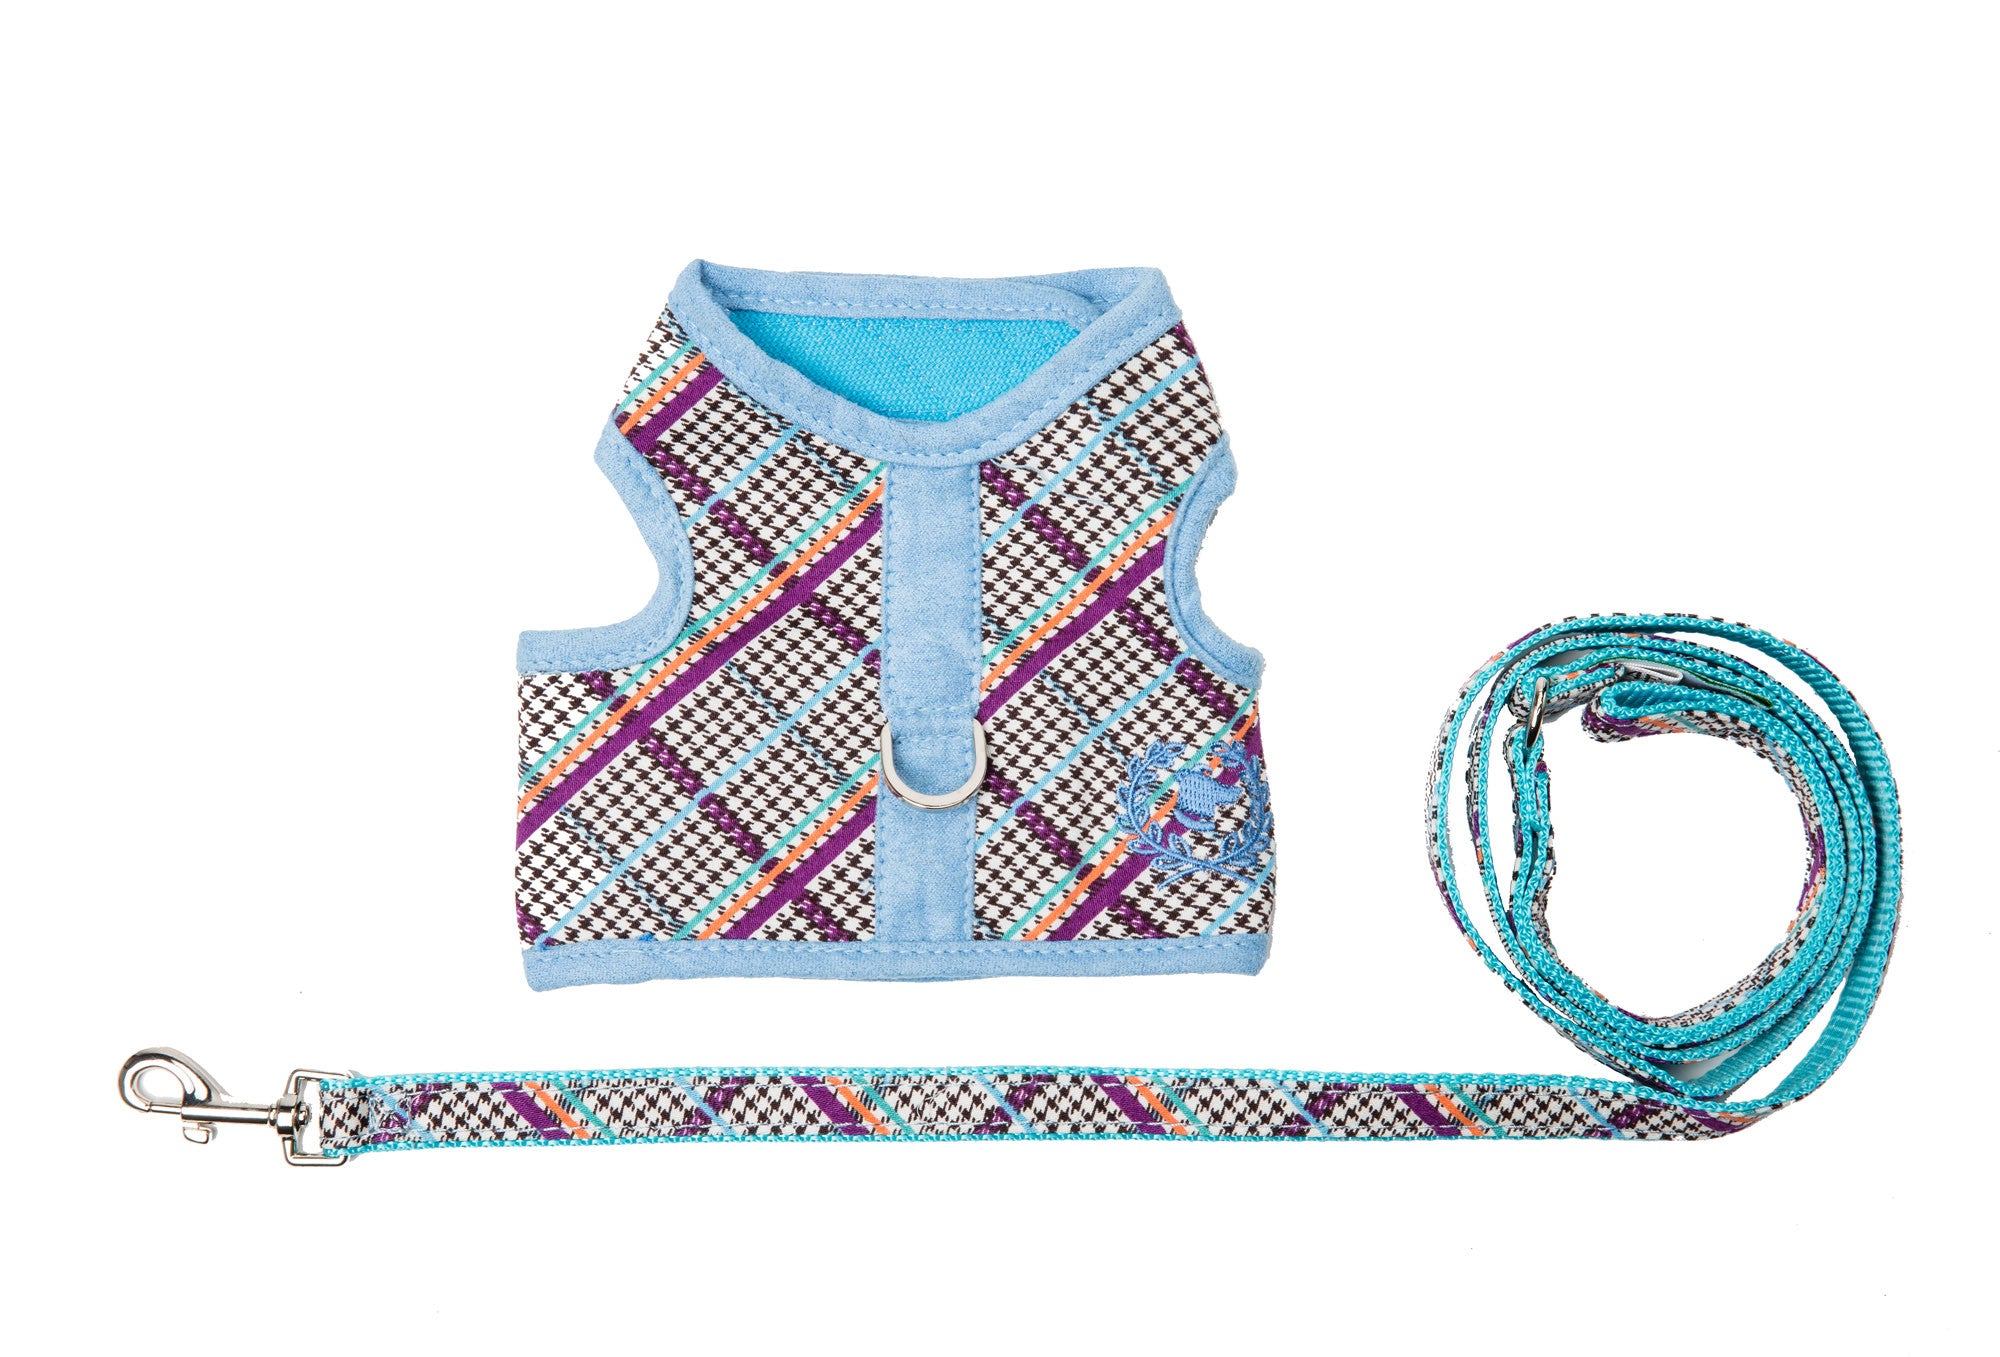 Signature Collection - UNLINED Dog Body Harnesses - Leads Additional - 3 Options